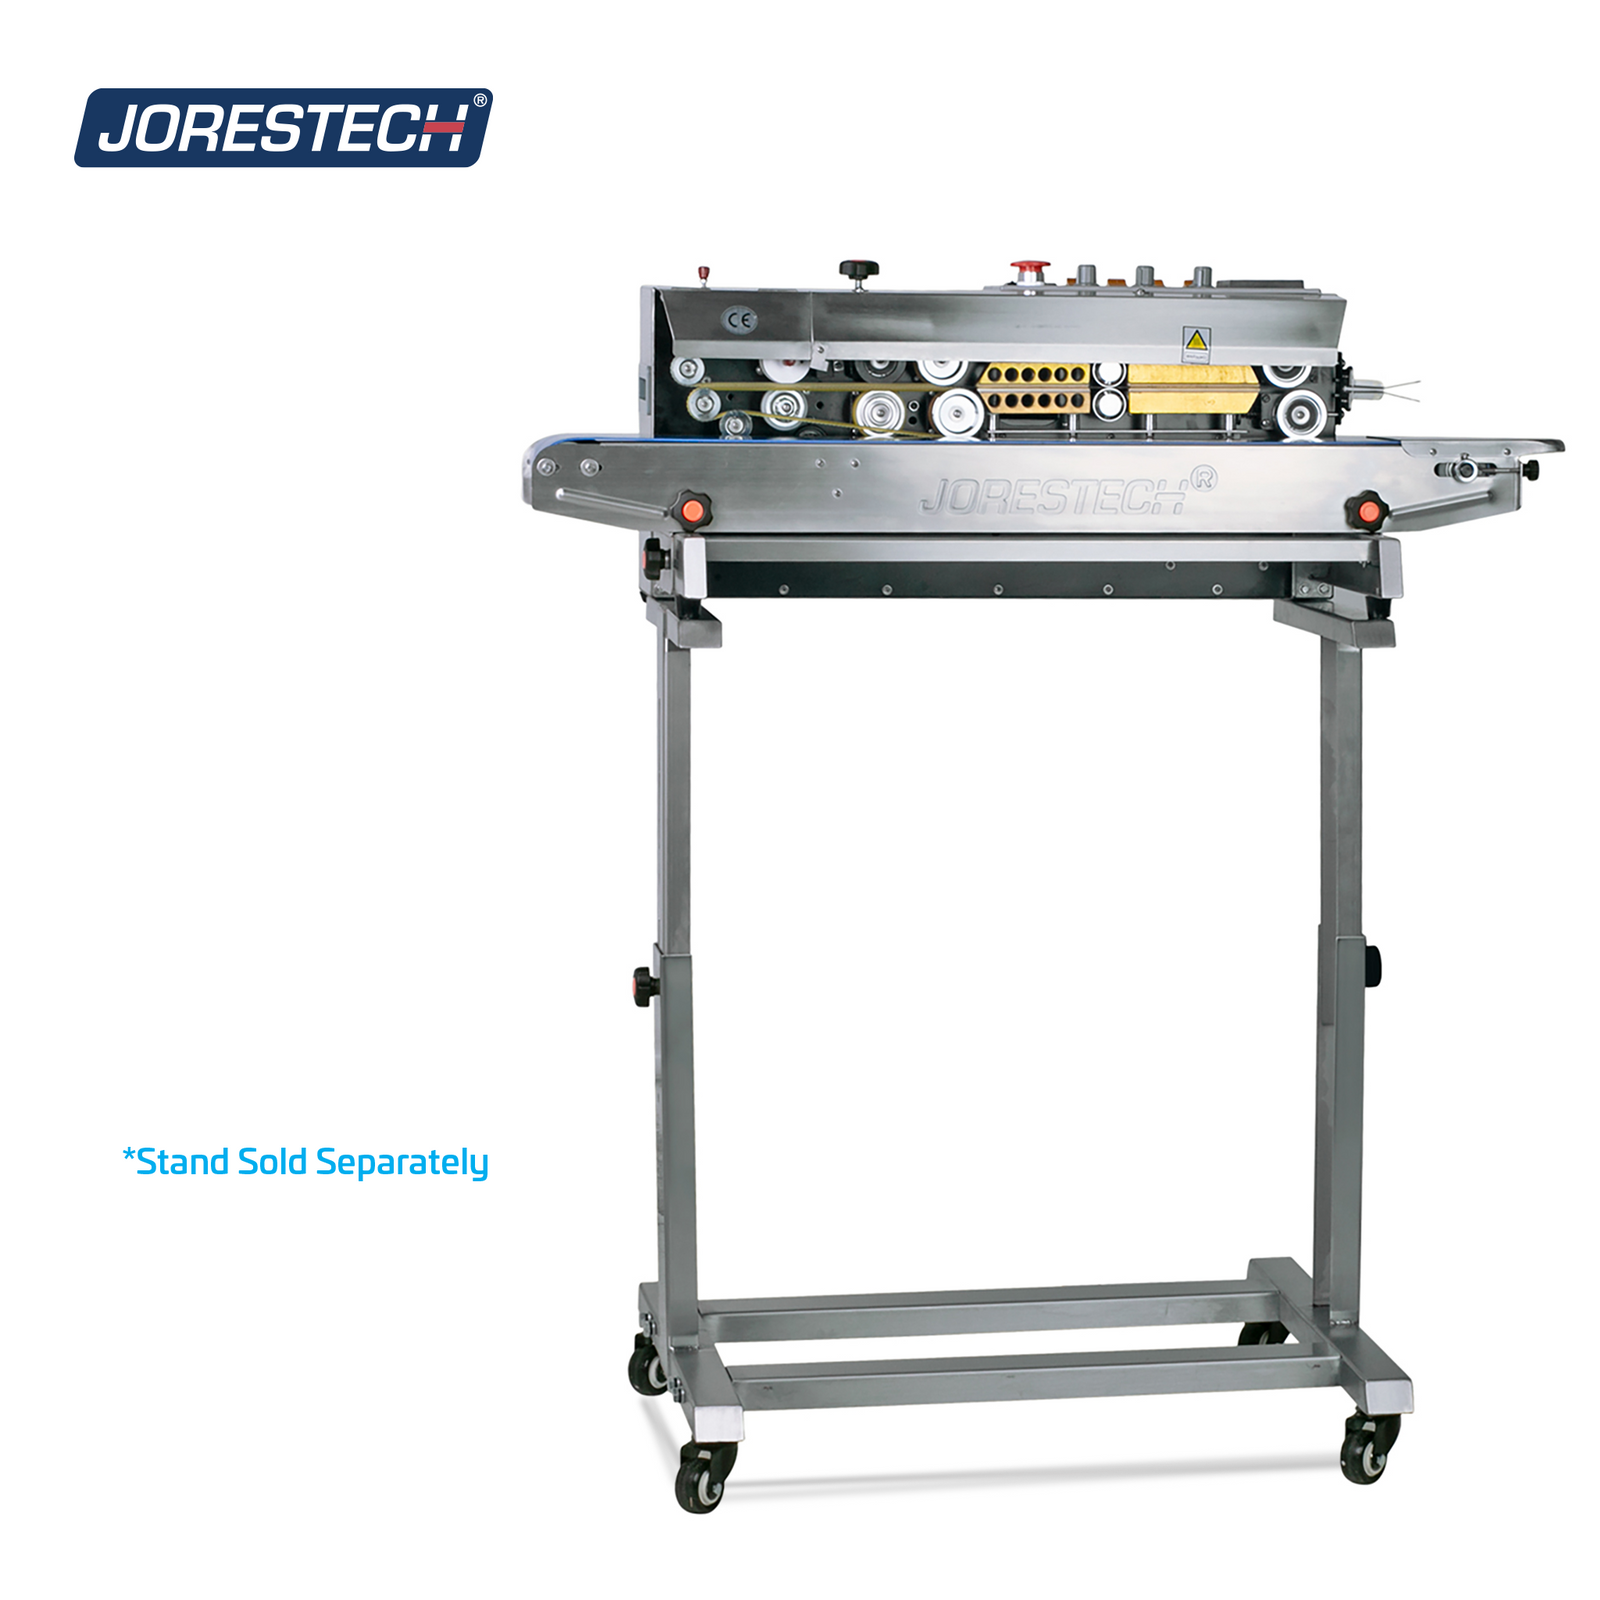 Stainless steel continuous band sealer with a stand. Text reads: stand sold separately.